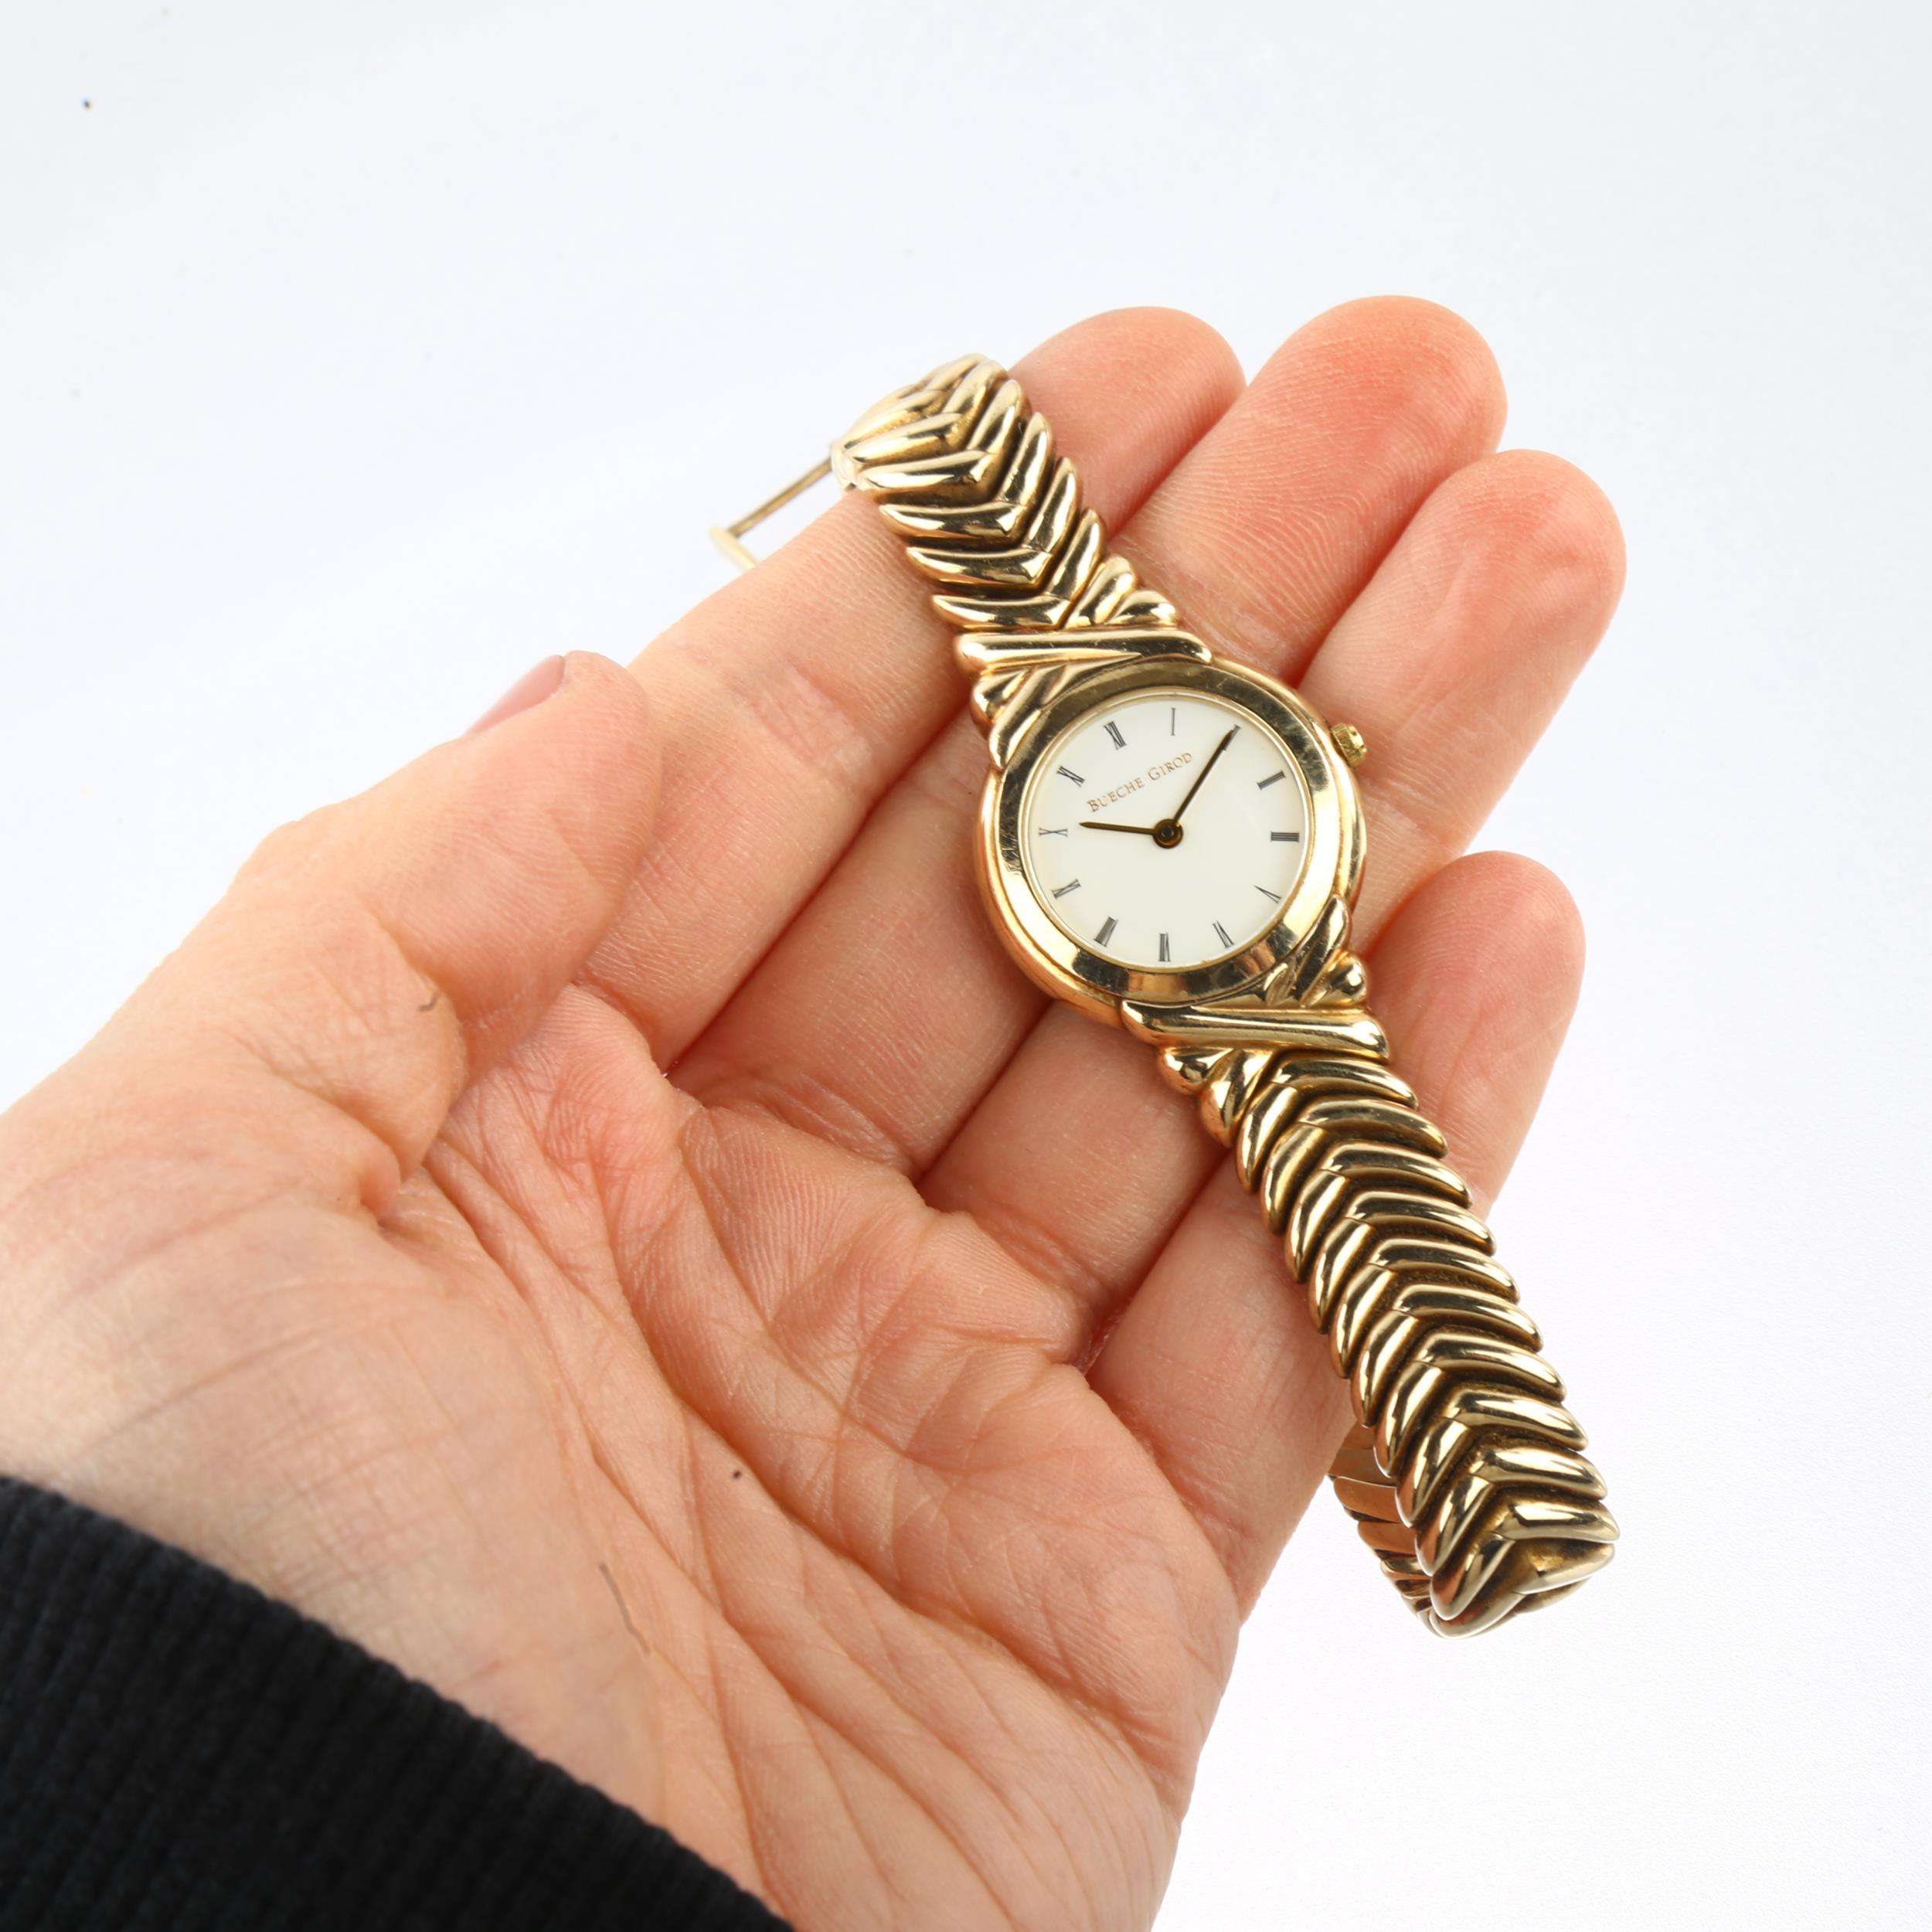 BUECHE GIROD - a lady's 9ct gold quartz bracelet watch, ref. 6006, white dial with Roman numeral - Image 5 of 5